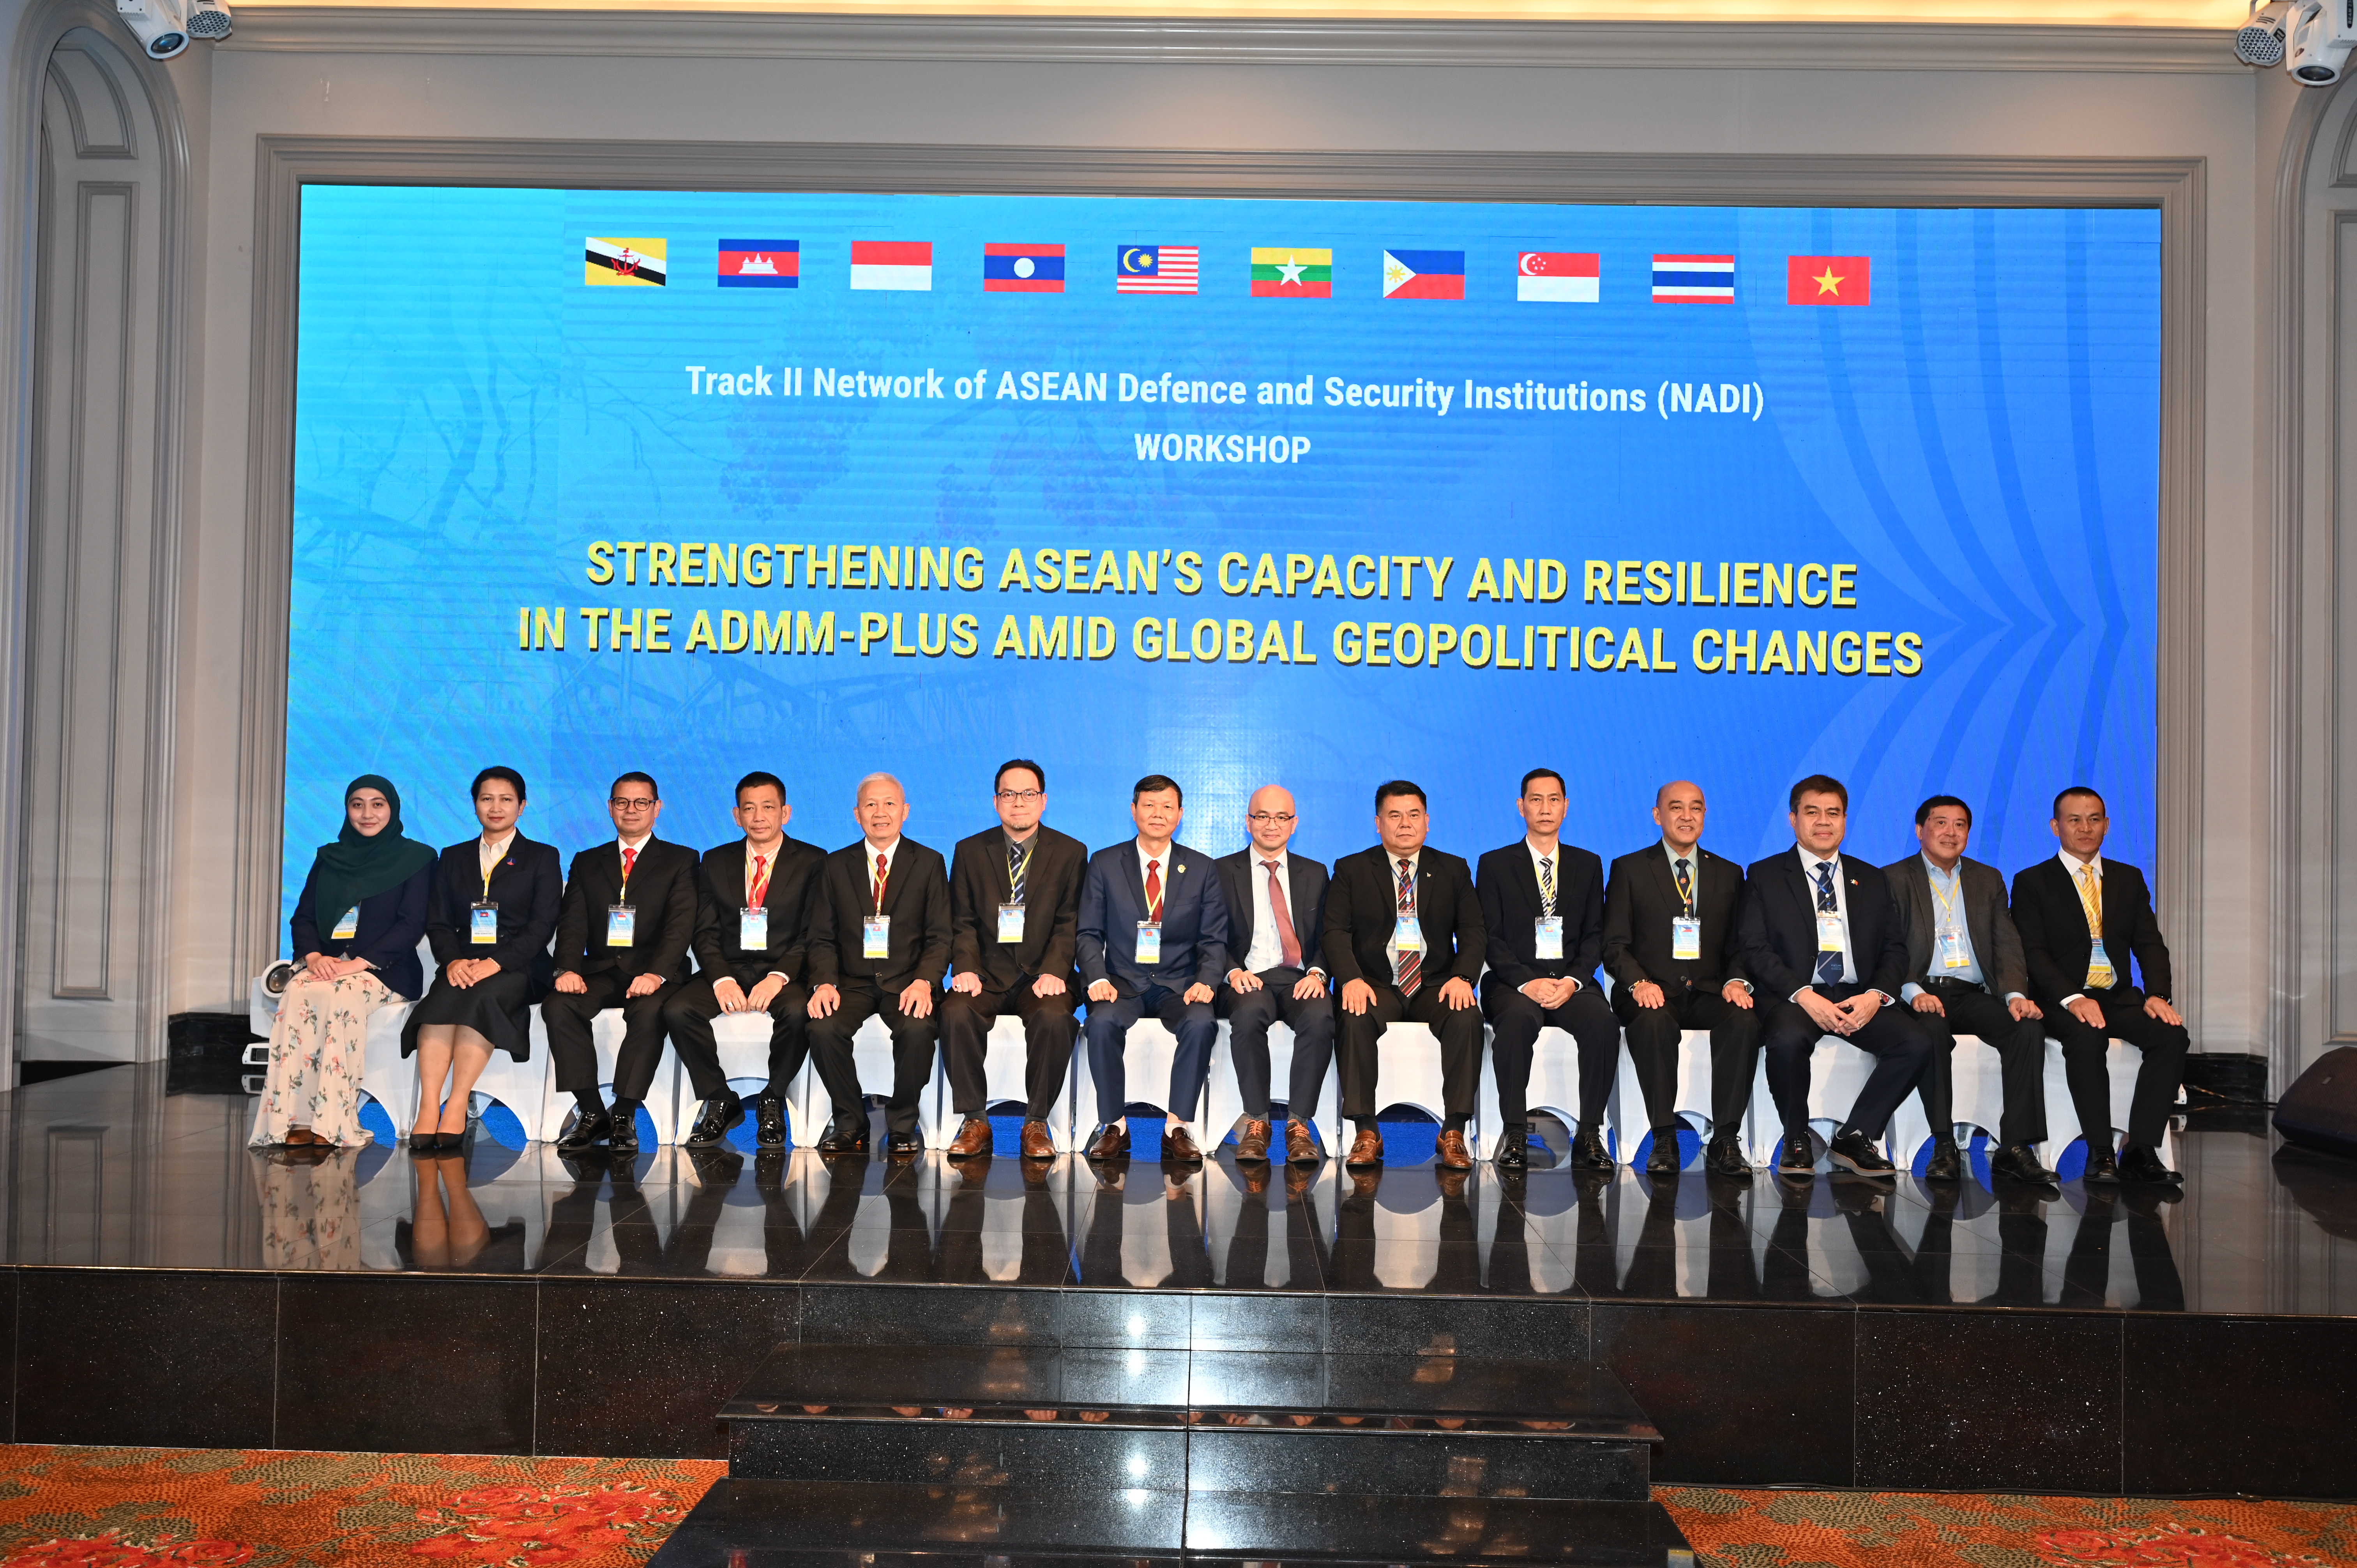 NADI Workshop on “Strengthening ASEAN’s Capacity and Resilience in the ADMM-Plus Amid Global Geopolitical Changes” - Hue City, Viet Nam